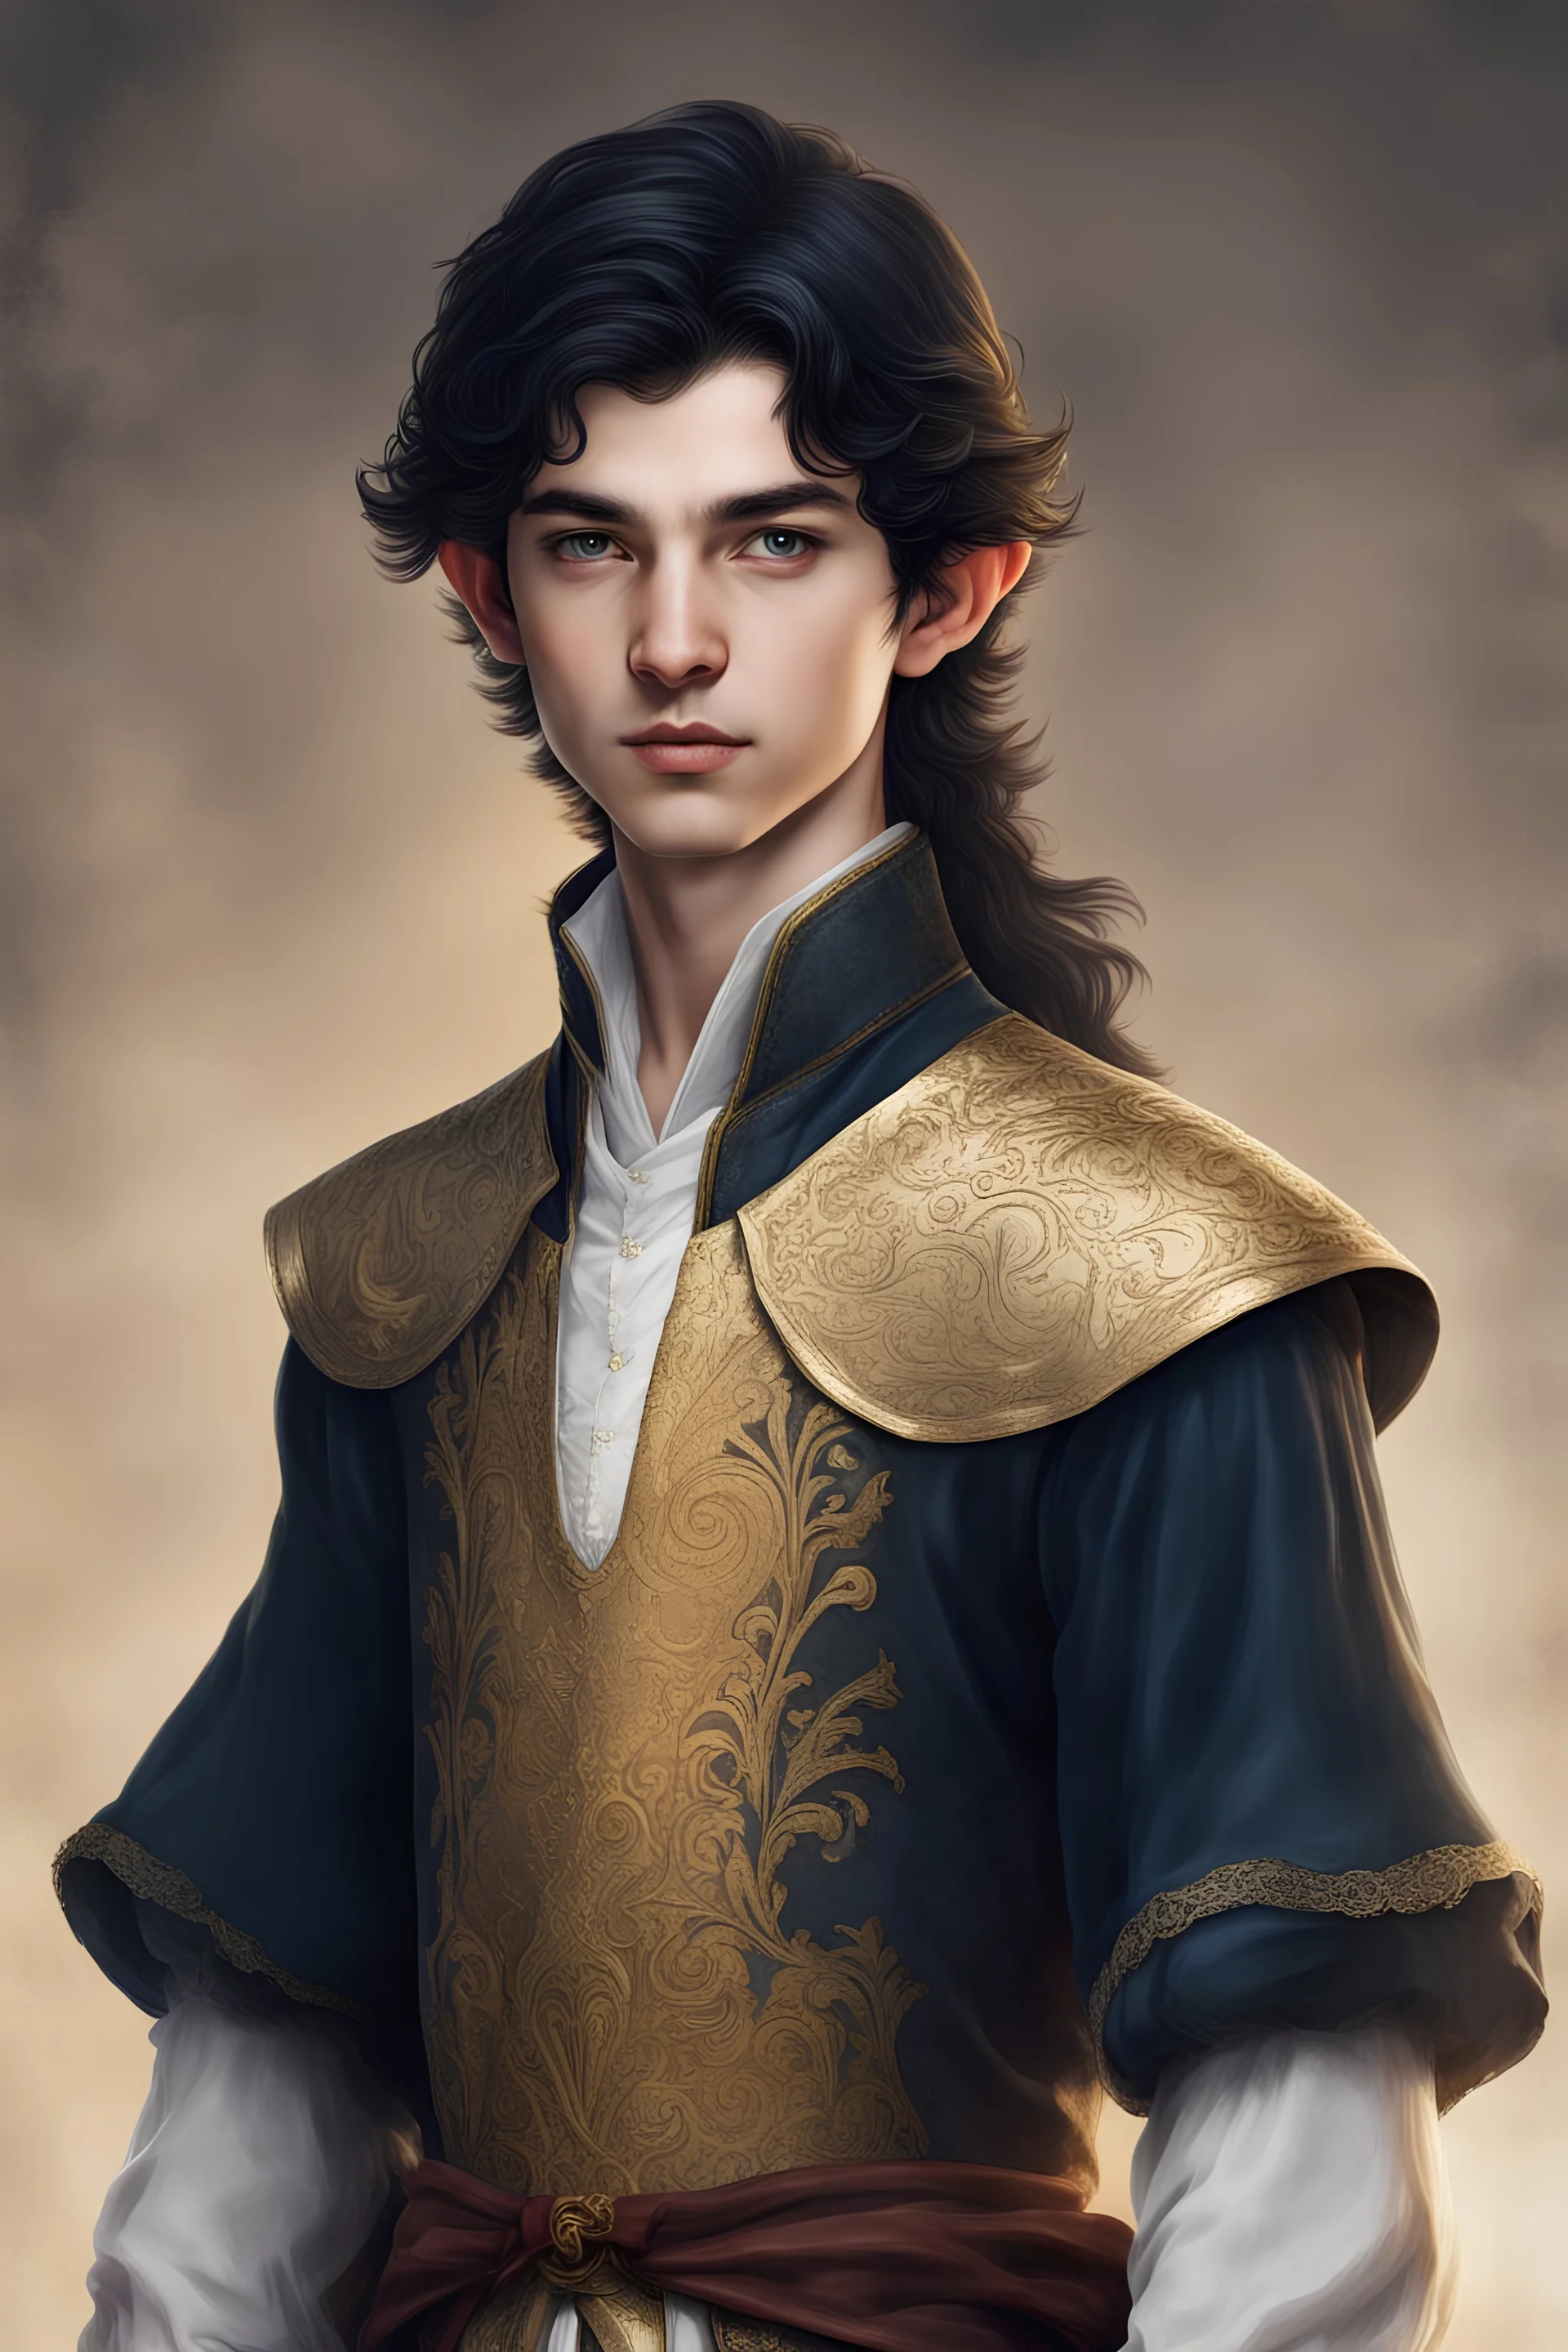 Young elven boy of seventeen years old, with black hair and golden eyes, dressed in aristocratic clothes from the 16th century.